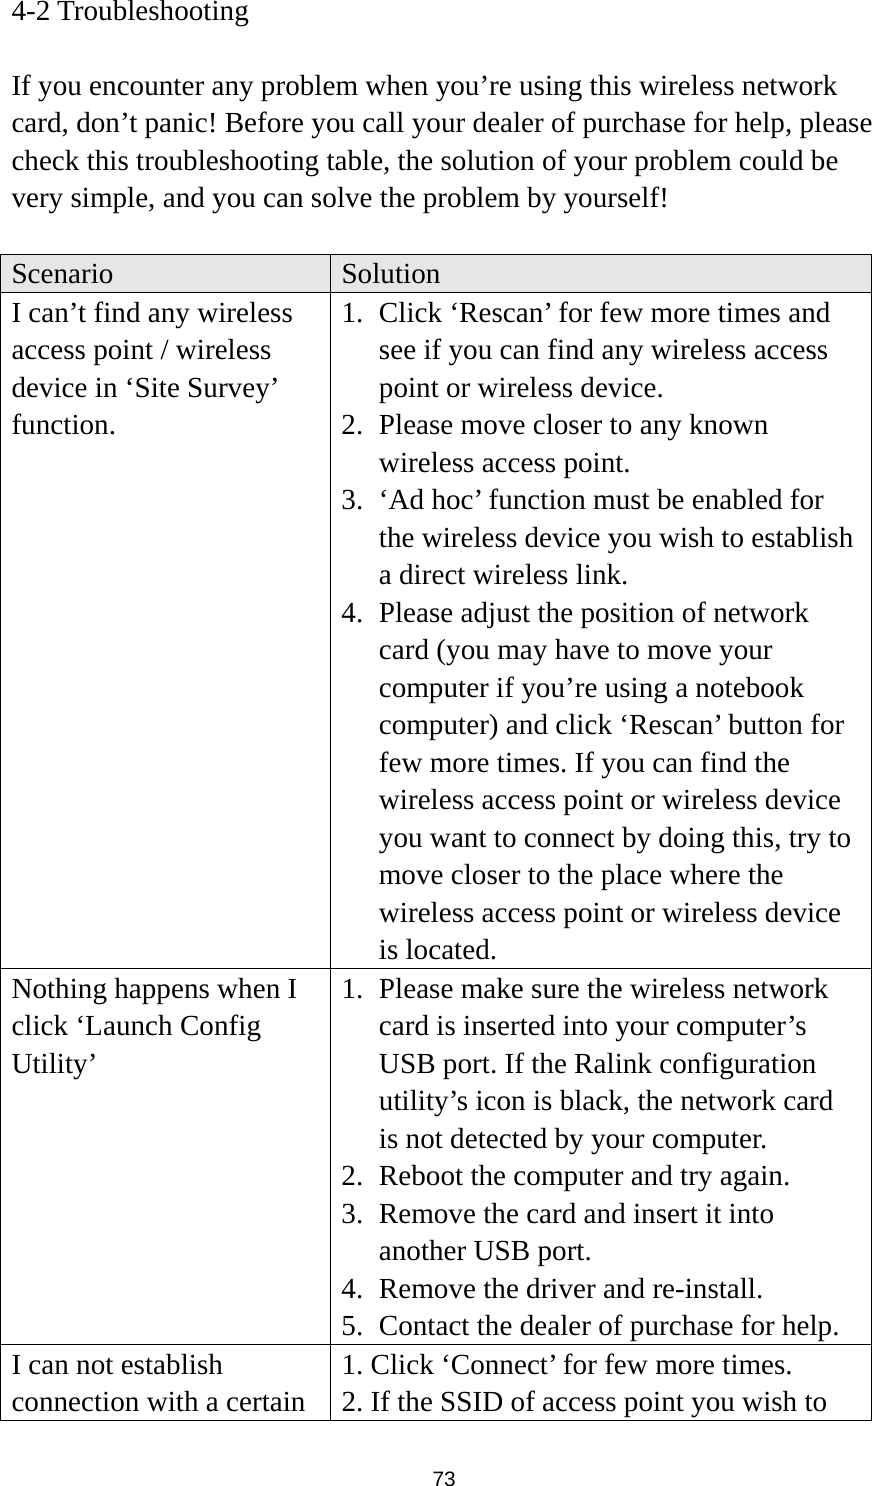  73 4-2 Troubleshooting  If you encounter any problem when you’re using this wireless network card, don’t panic! Before you call your dealer of purchase for help, please check this troubleshooting table, the solution of your problem could be very simple, and you can solve the problem by yourself!  Scenario  Solution I can’t find any wireless access point / wireless device in ‘Site Survey’ function. 1. Click ‘Rescan’ for few more times and see if you can find any wireless access point or wireless device. 2. Please move closer to any known wireless access point. 3. ‘Ad hoc’ function must be enabled for the wireless device you wish to establish a direct wireless link. 4. Please adjust the position of network card (you may have to move your computer if you’re using a notebook computer) and click ‘Rescan’ button for few more times. If you can find the wireless access point or wireless device you want to connect by doing this, try to move closer to the place where the wireless access point or wireless device is located. Nothing happens when I click ‘Launch Config Utility’ 1. Please make sure the wireless network card is inserted into your computer’s USB port. If the Ralink configuration utility’s icon is black, the network card is not detected by your computer. 2. Reboot the computer and try again. 3. Remove the card and insert it into another USB port. 4. Remove the driver and re-install. 5. Contact the dealer of purchase for help. I can not establish connection with a certain 1. Click ‘Connect’ for few more times. 2. If the SSID of access point you wish to 